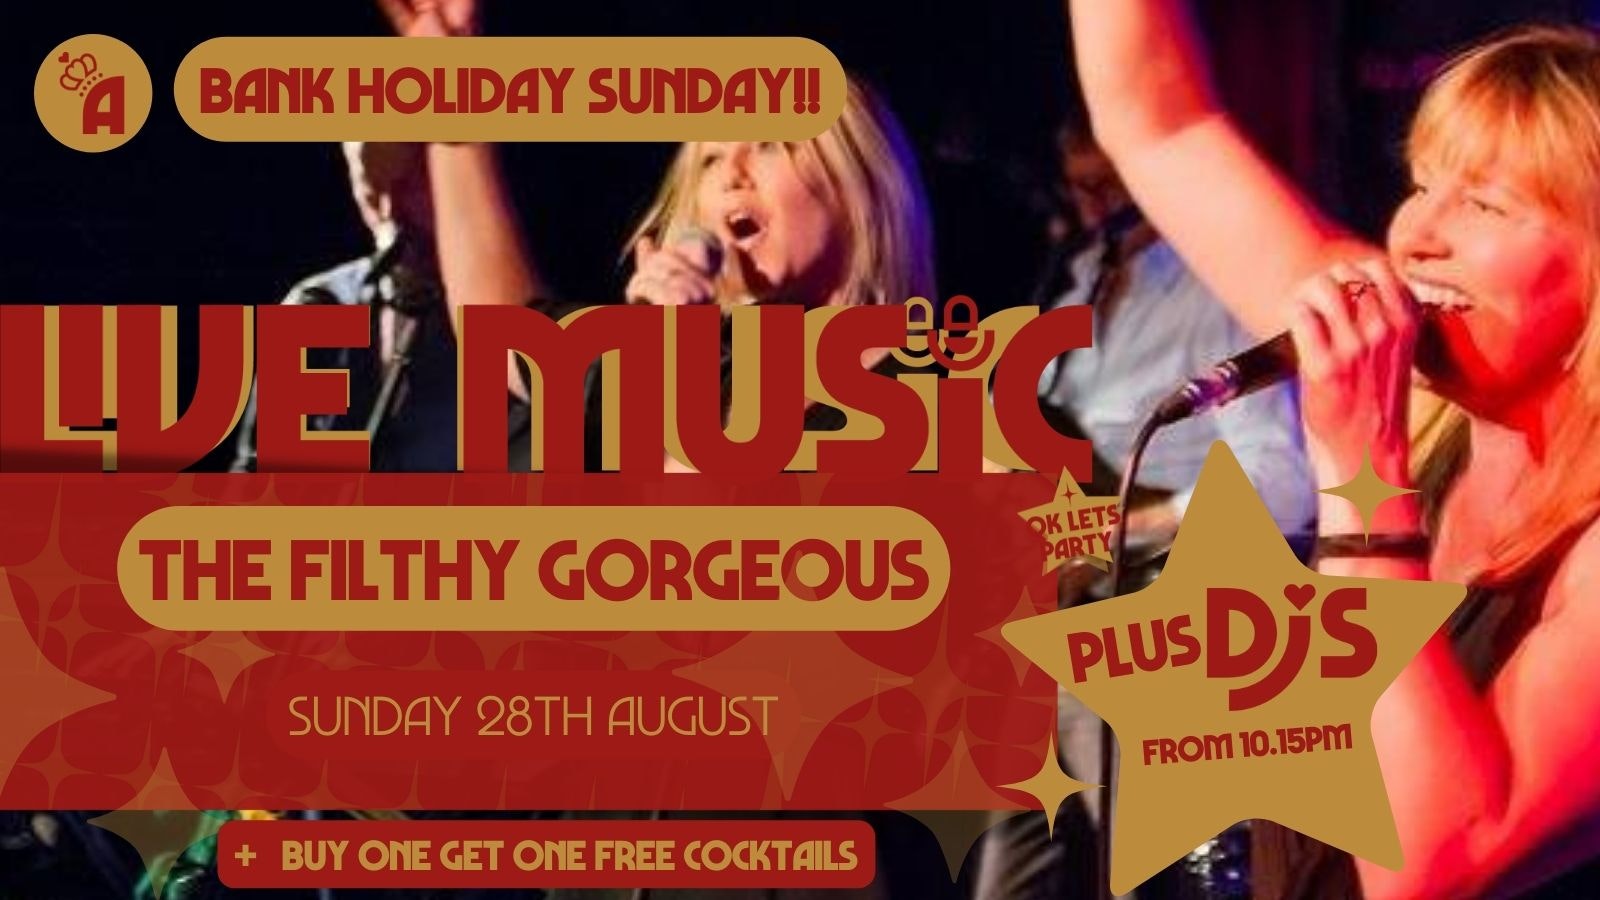 Bank Holiday Sunday: THE FILTHY GORGEOUS // Annabel’s Cabaret & Discotheque, Plymouth